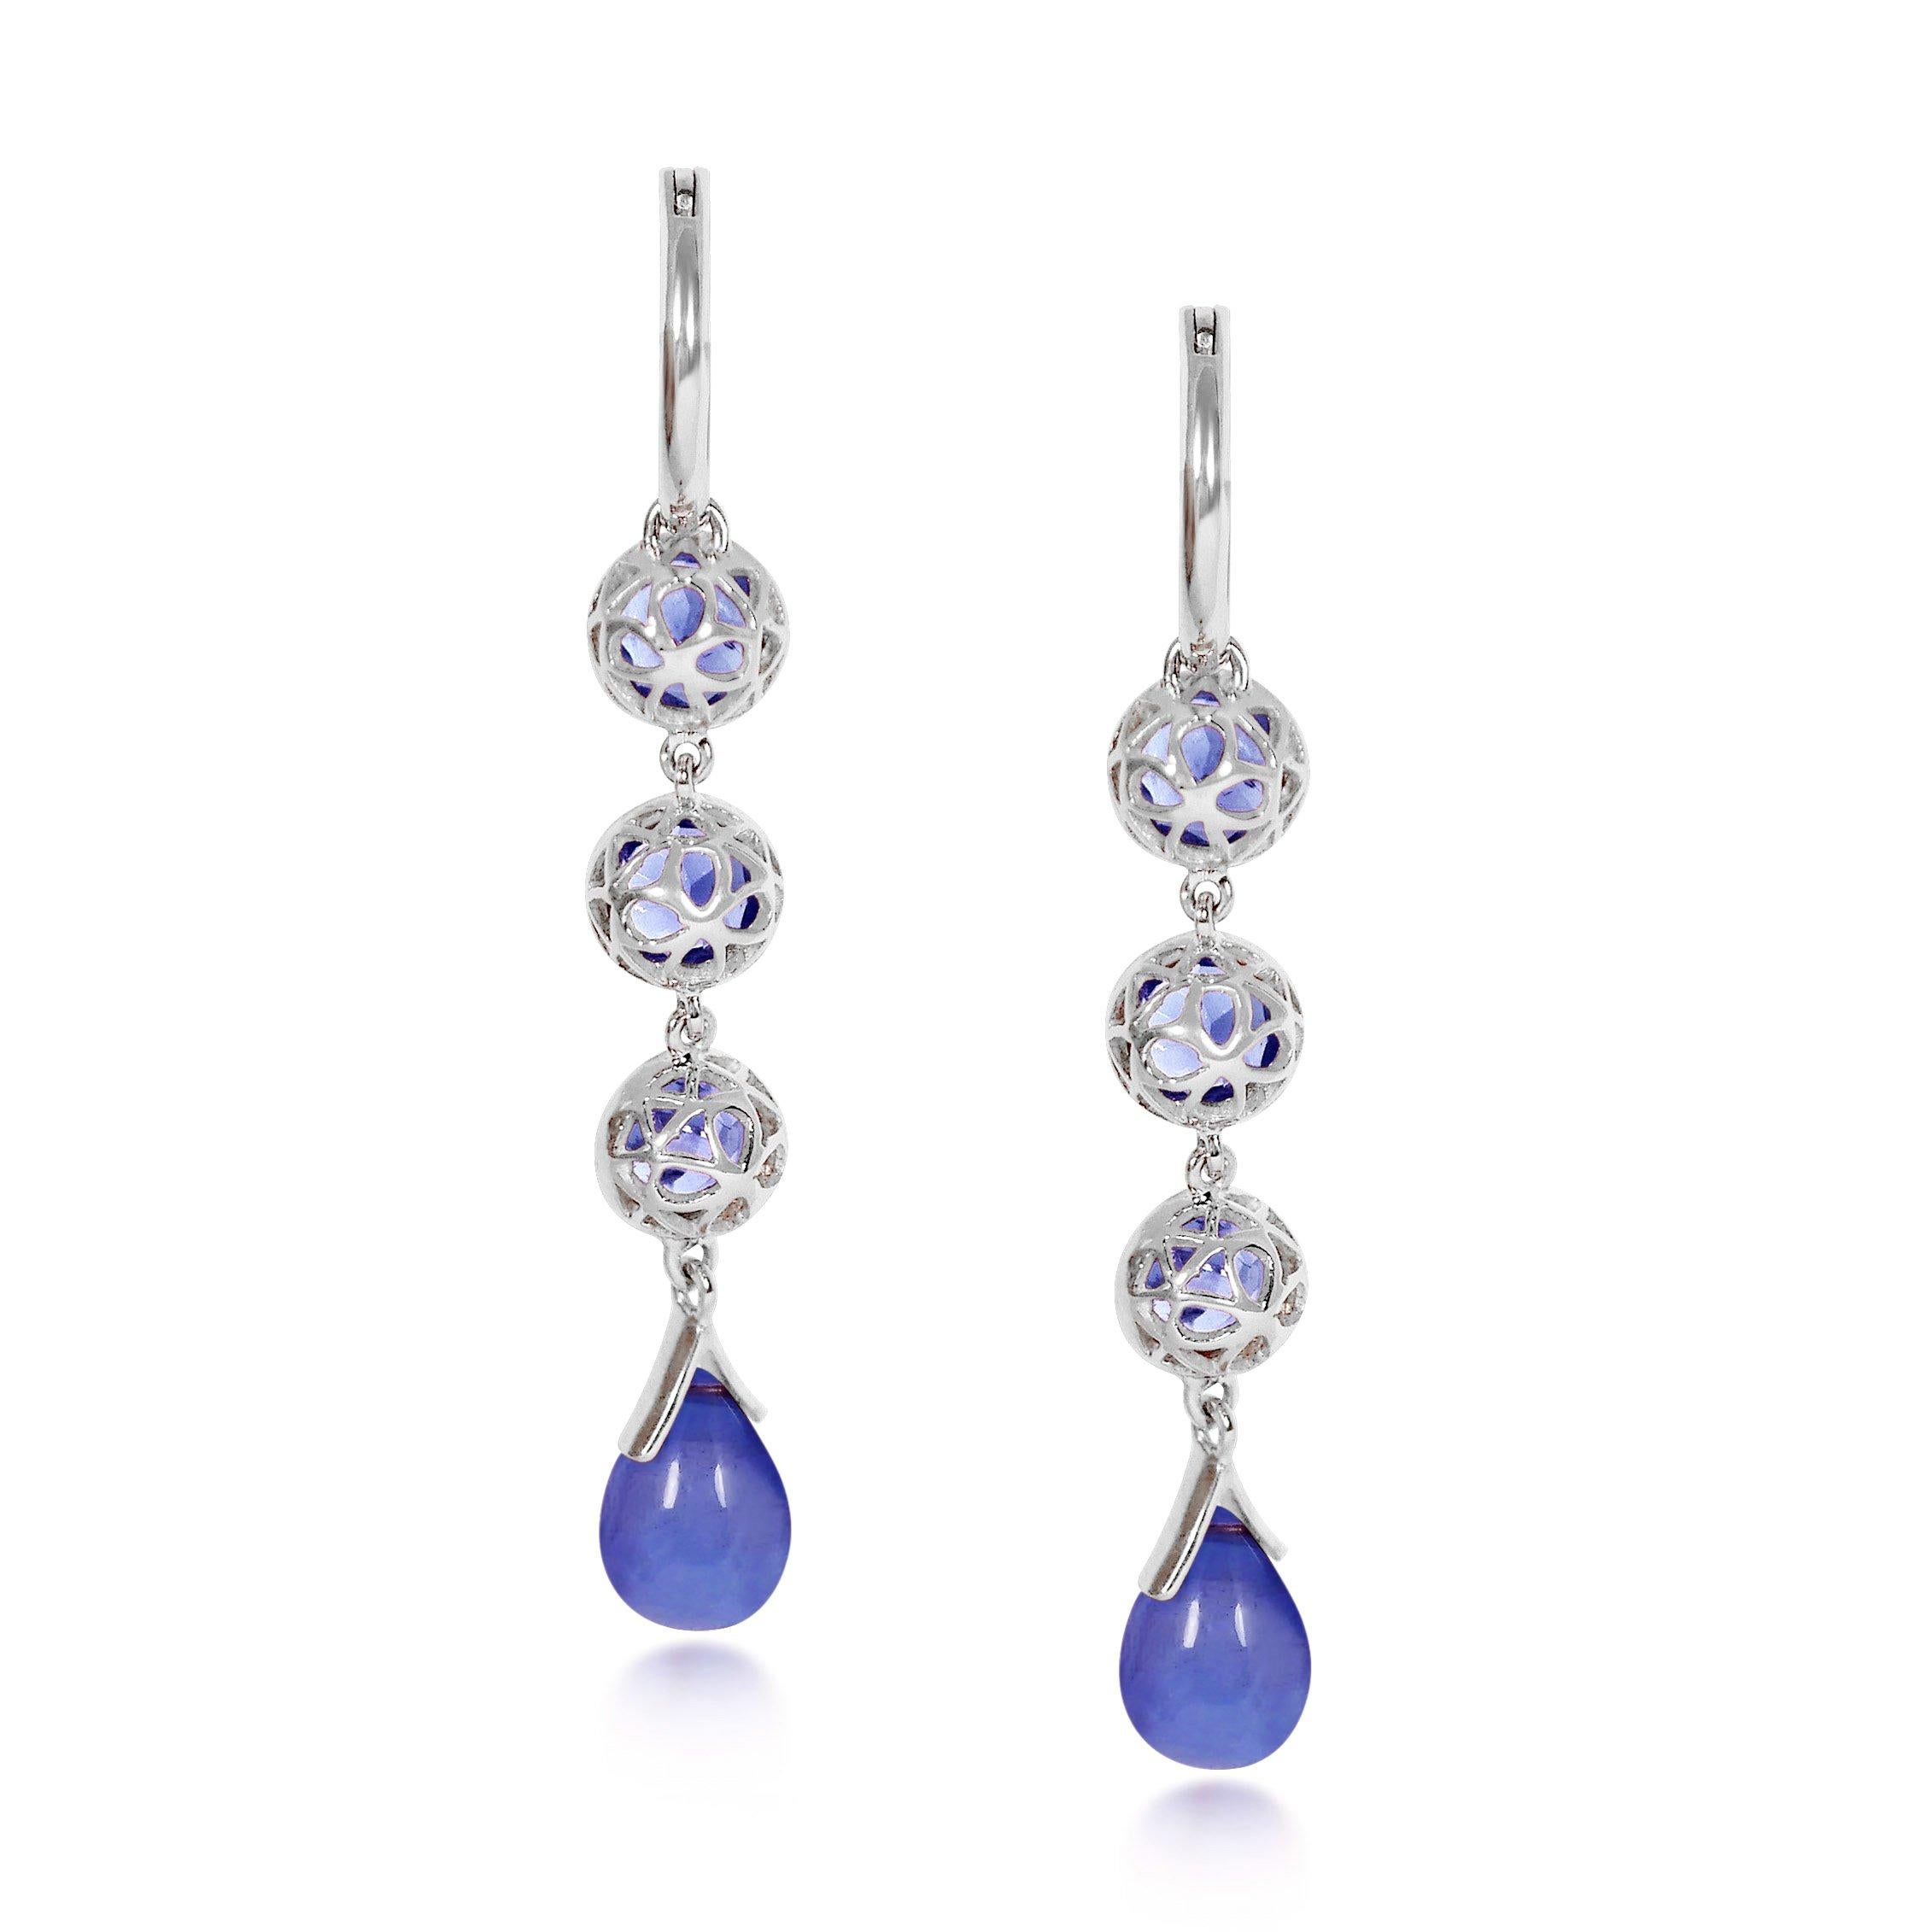 Handcrafted 1.65 Carats Tanzanites 18 Karat White Gold Drop Earrings. Our stone cascade-like earrings are an elegant statement underlined by romantic dancing drops carved in Tanzanite under a set of 6mm round cut Tanzanite stones encased in our